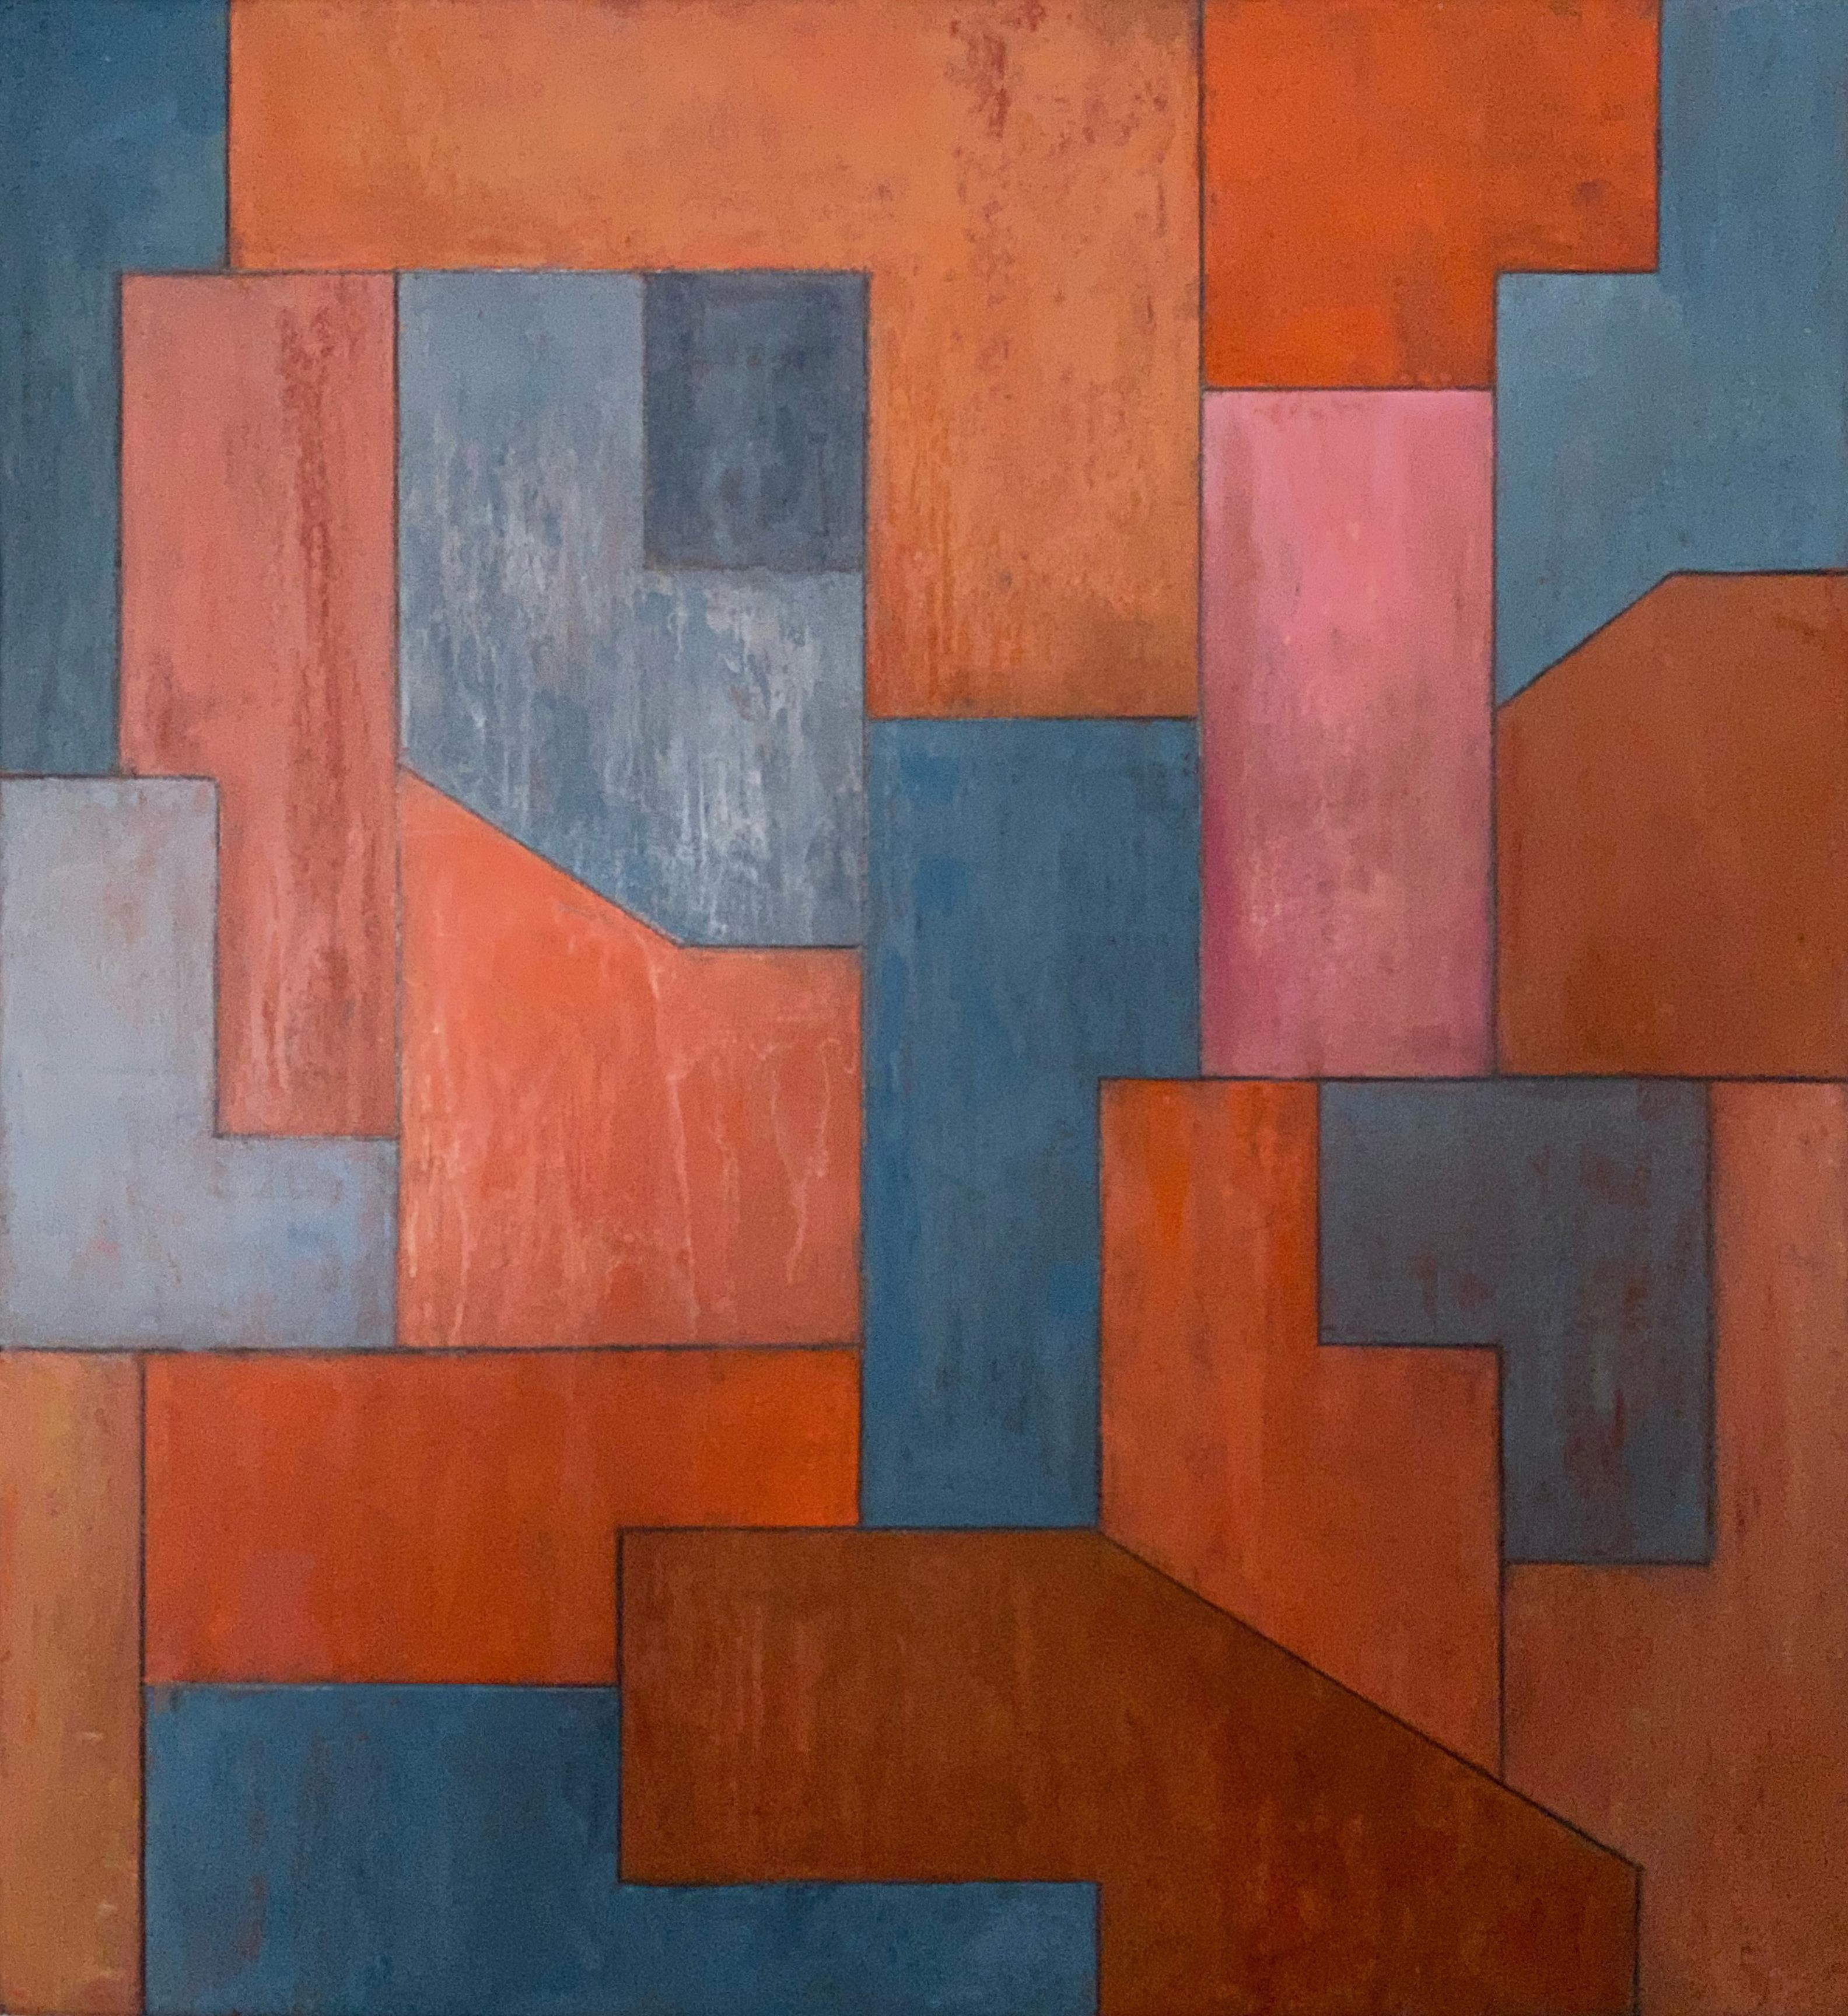 Stephen Cimini Abstract Painting - 24x22x2 in. - Oil Painting - Geometric Architectural Contemporary - Opposites